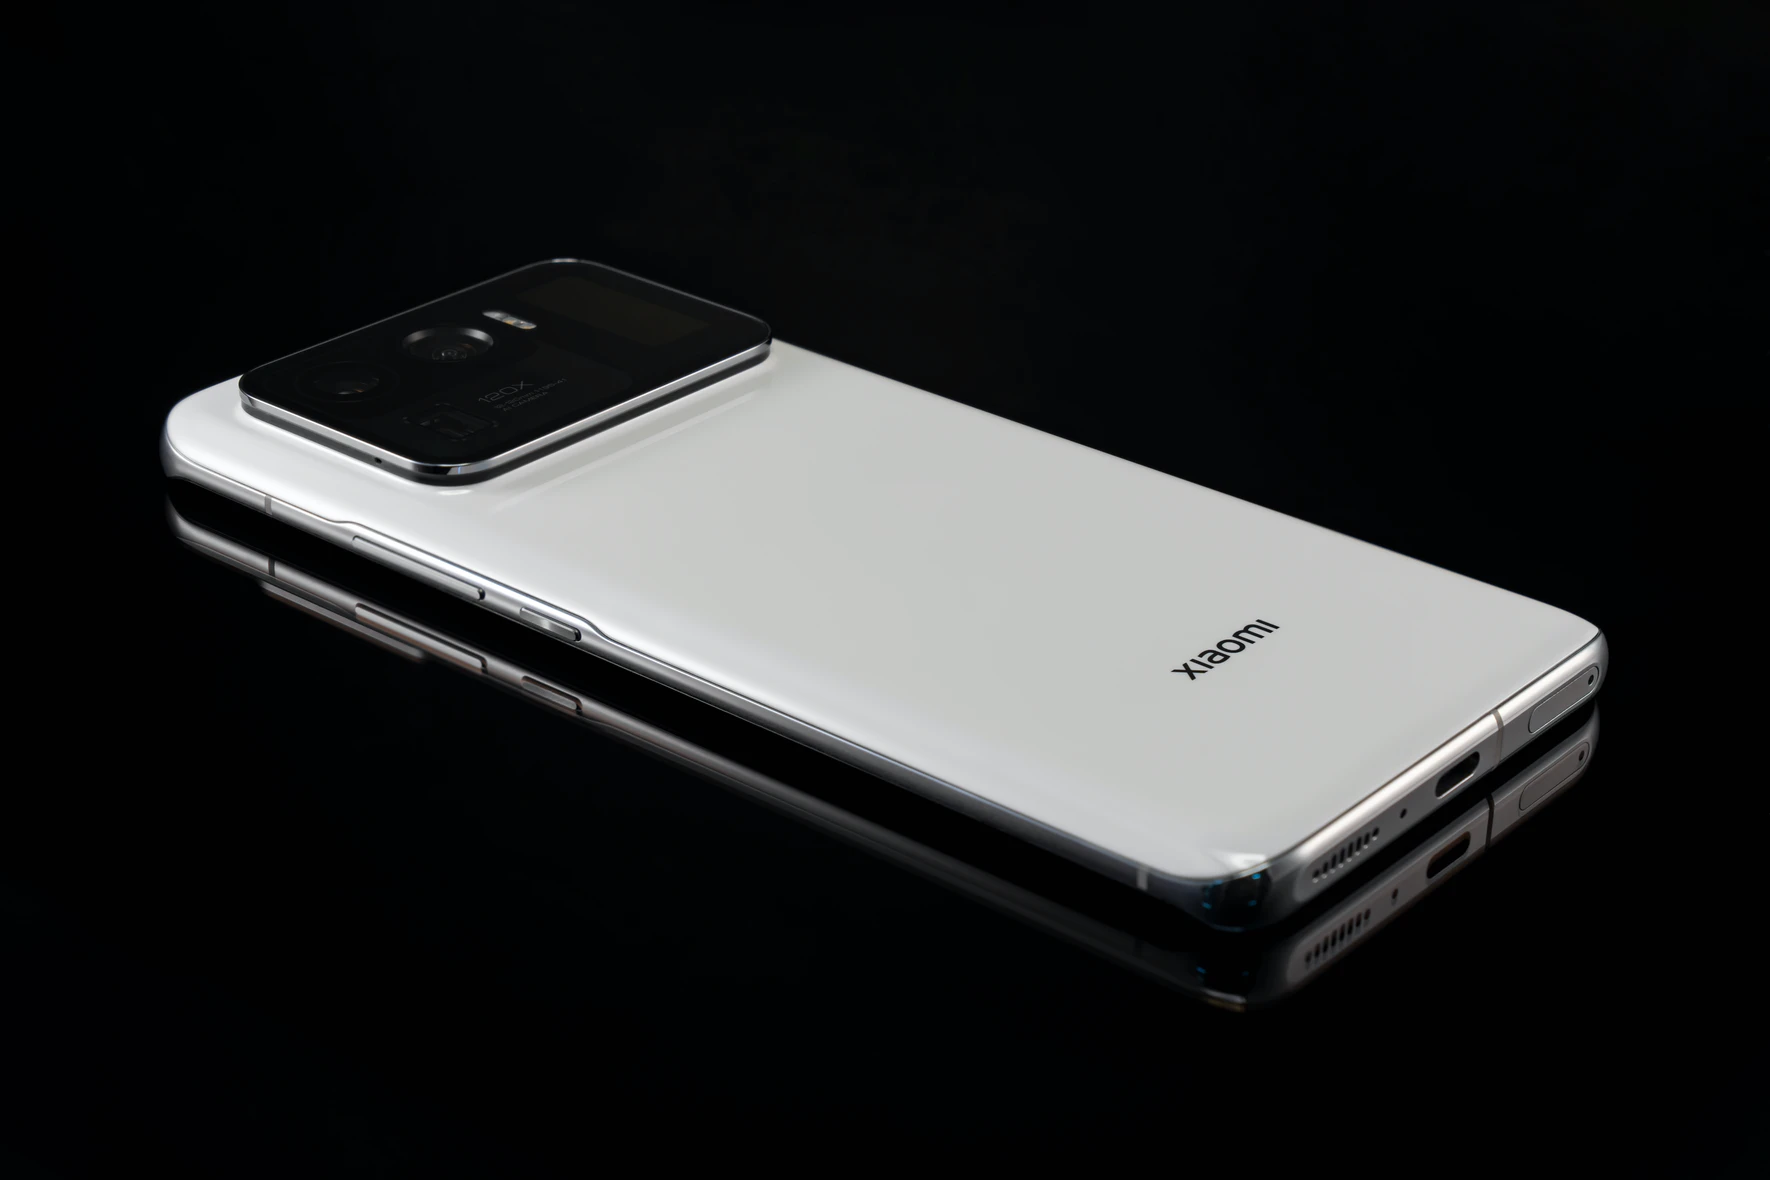 Xiaomi 12S Ultra - Full Specifications